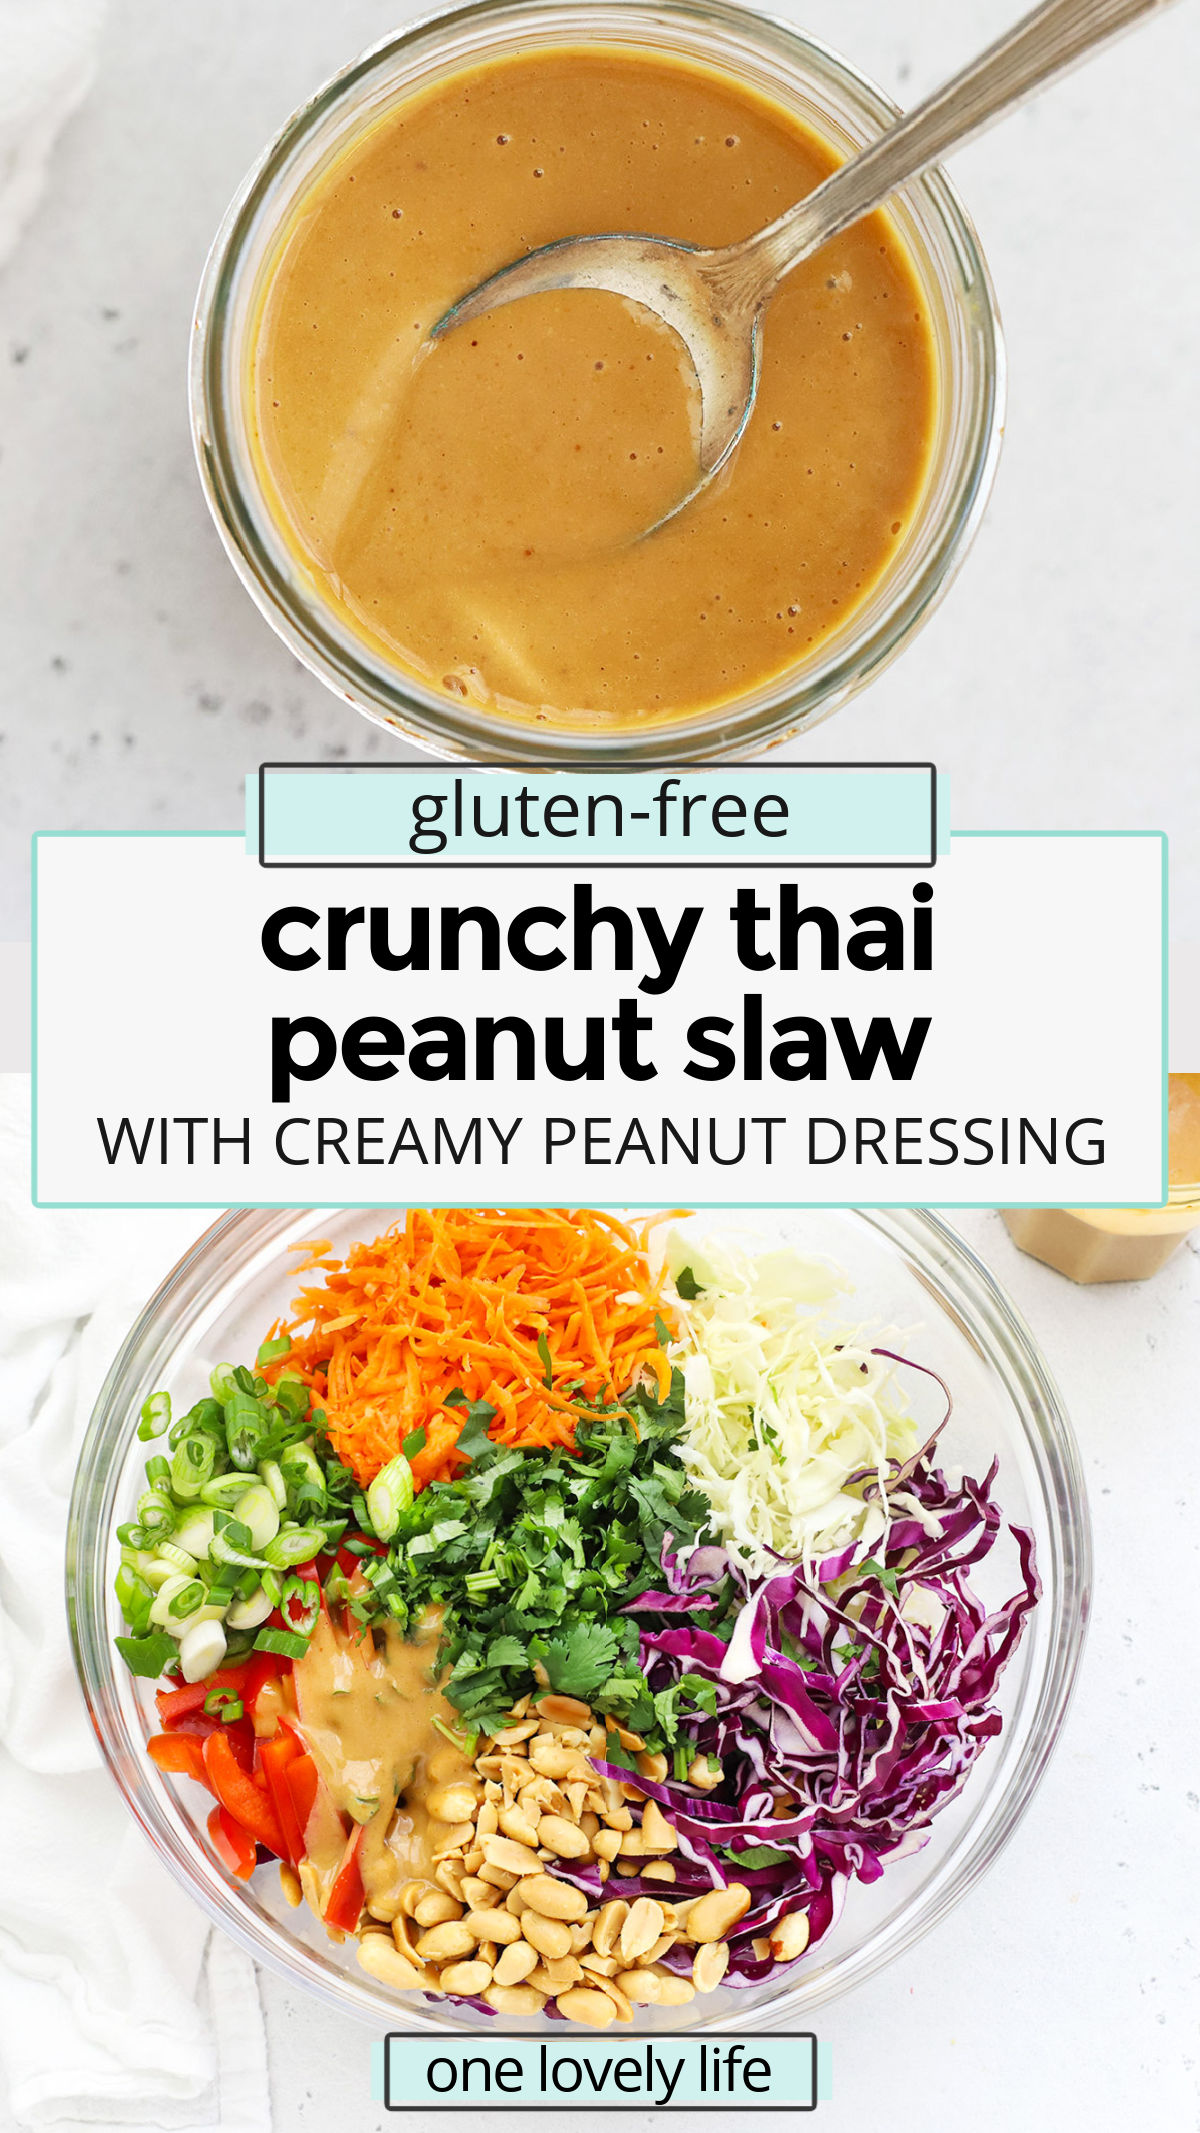 Crunchy Thai Peanut Slaw - This veggie slaw with peanut sauce is the perfect blend of colors, flavors, and textures. Fresh, crunchy, creamy, and gorgeous, it's a perfect healthy side dish. (Vegan, Gluten-Free) // thai coleslaw // asian coleslaw // peanut coleslaw // coleslaw without mayo // coleslaw no mayo // peanut sauce dressing // peanut dressing // vegan coleslaw // coleslaw with peanut sauce // healthy coleslaw